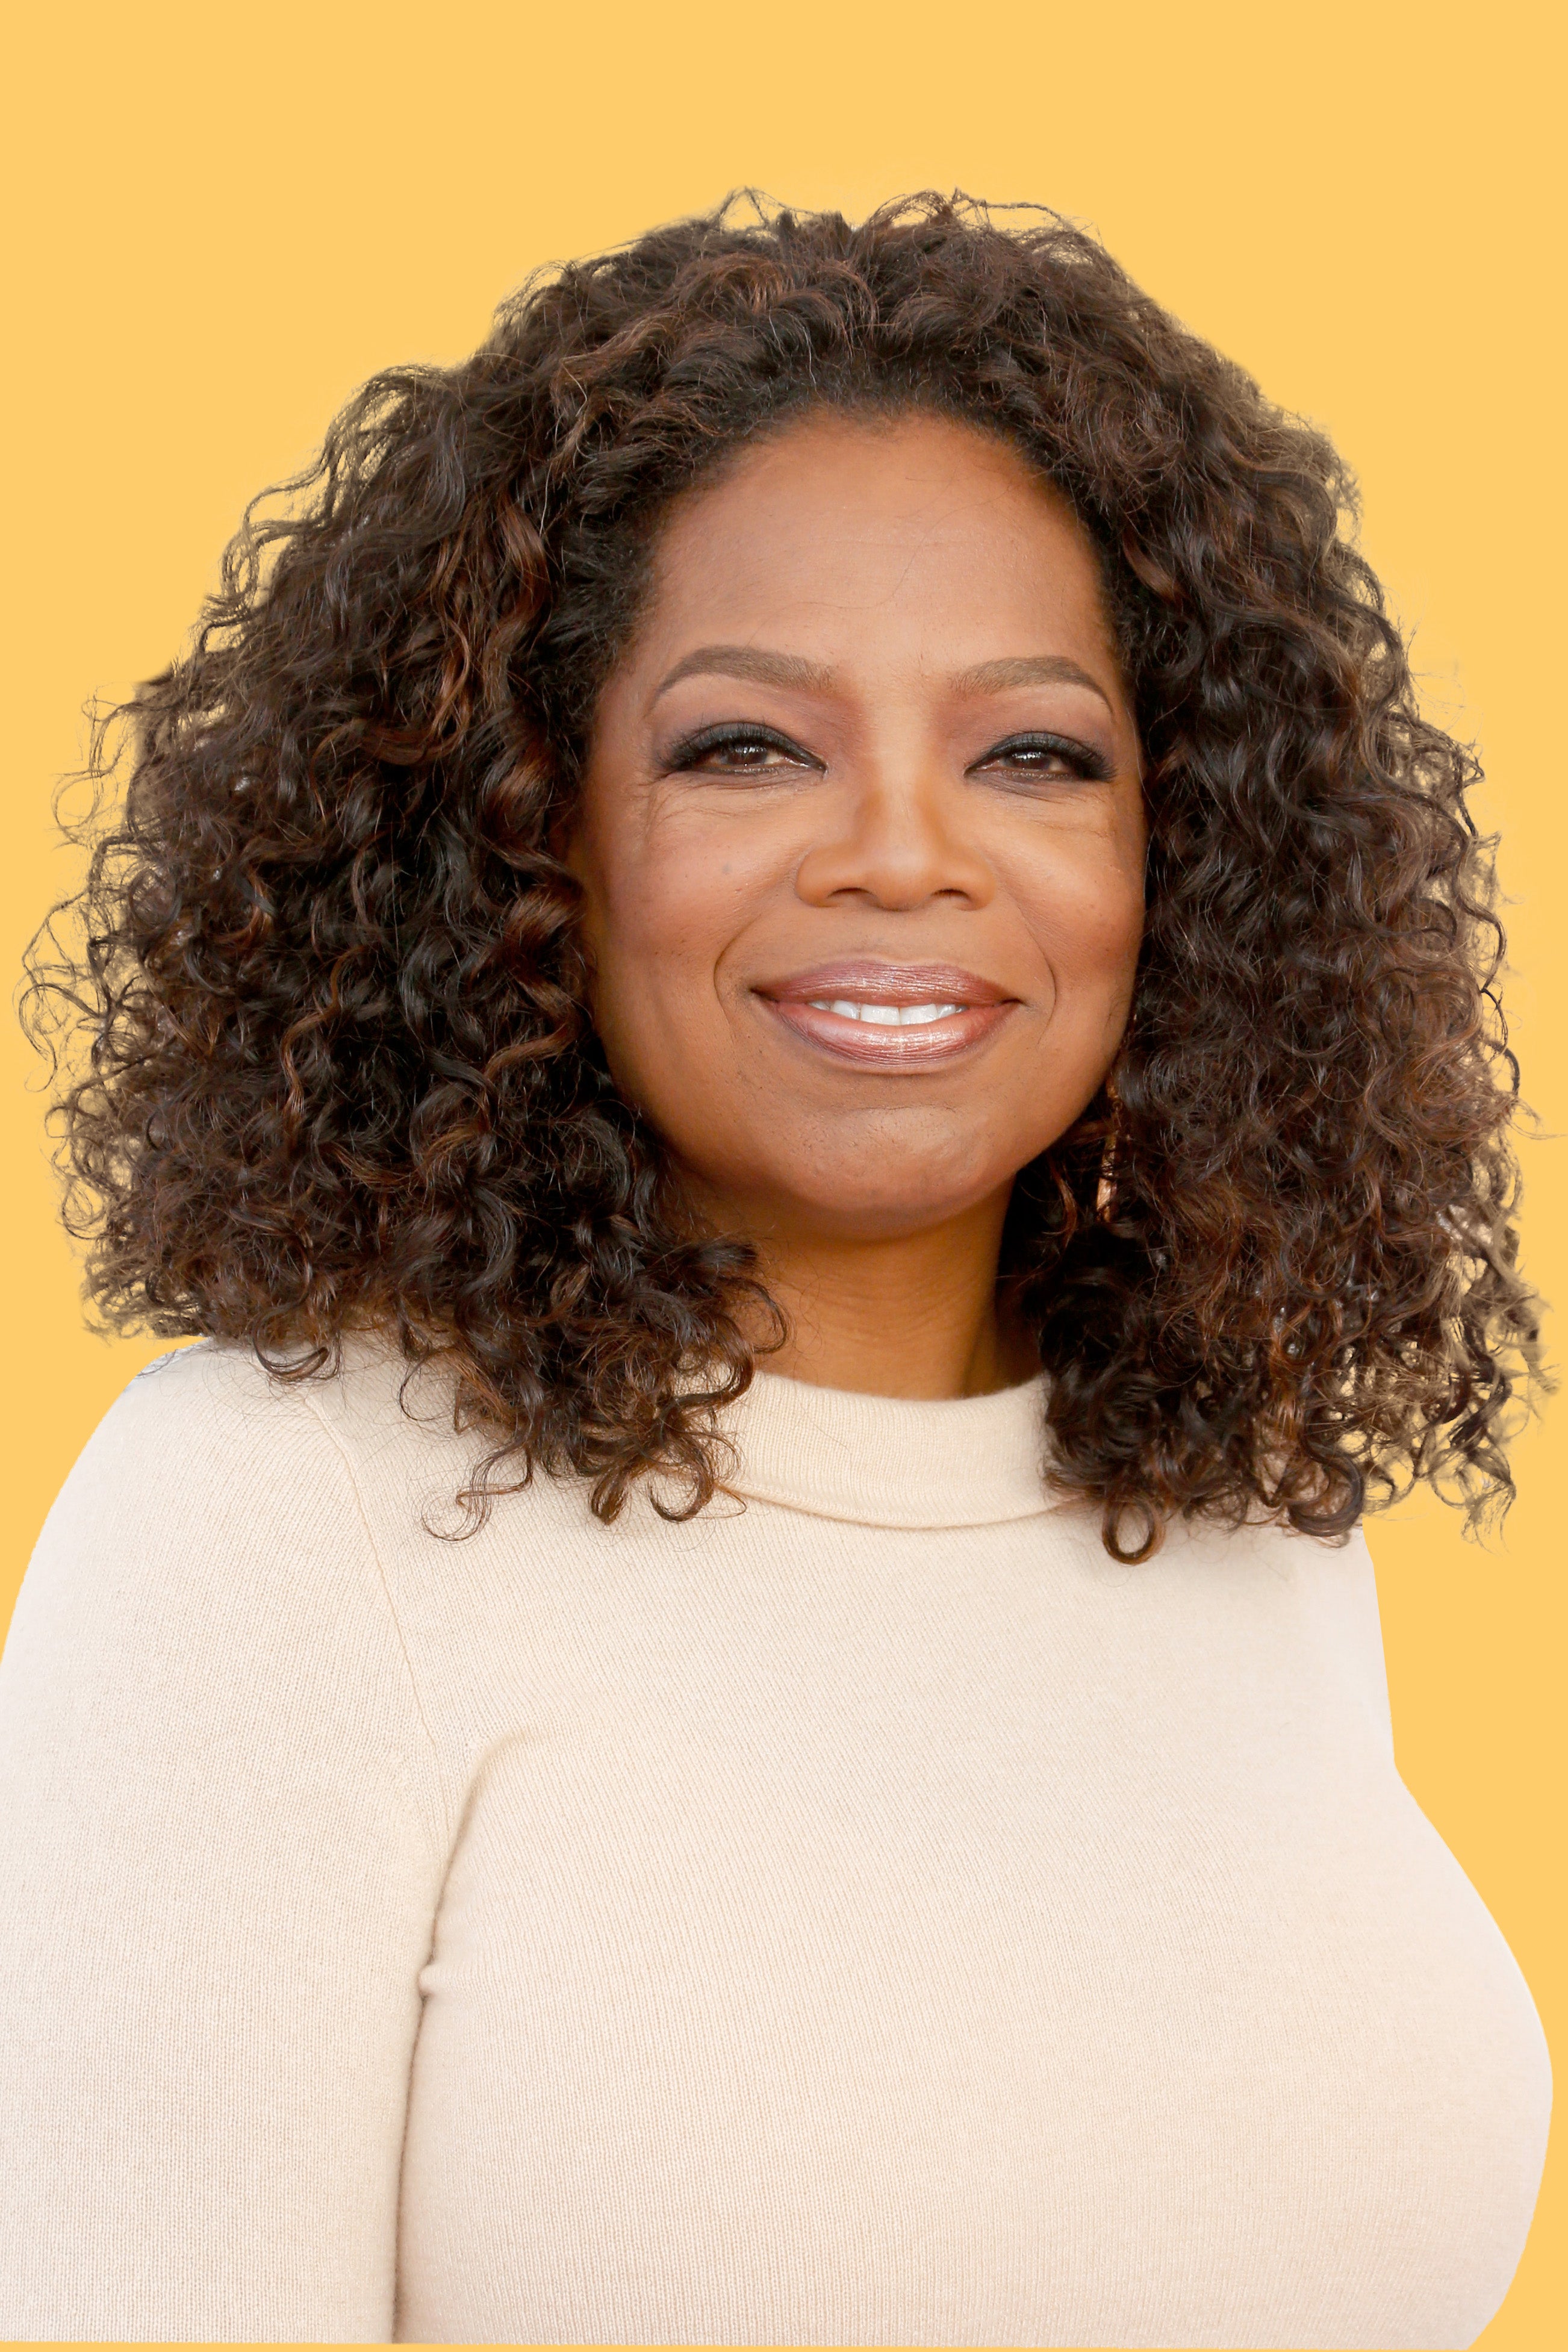 Oprah Reveals That She Reads Slavery Documents In Order To Keep Her Perspective On Bad Days
